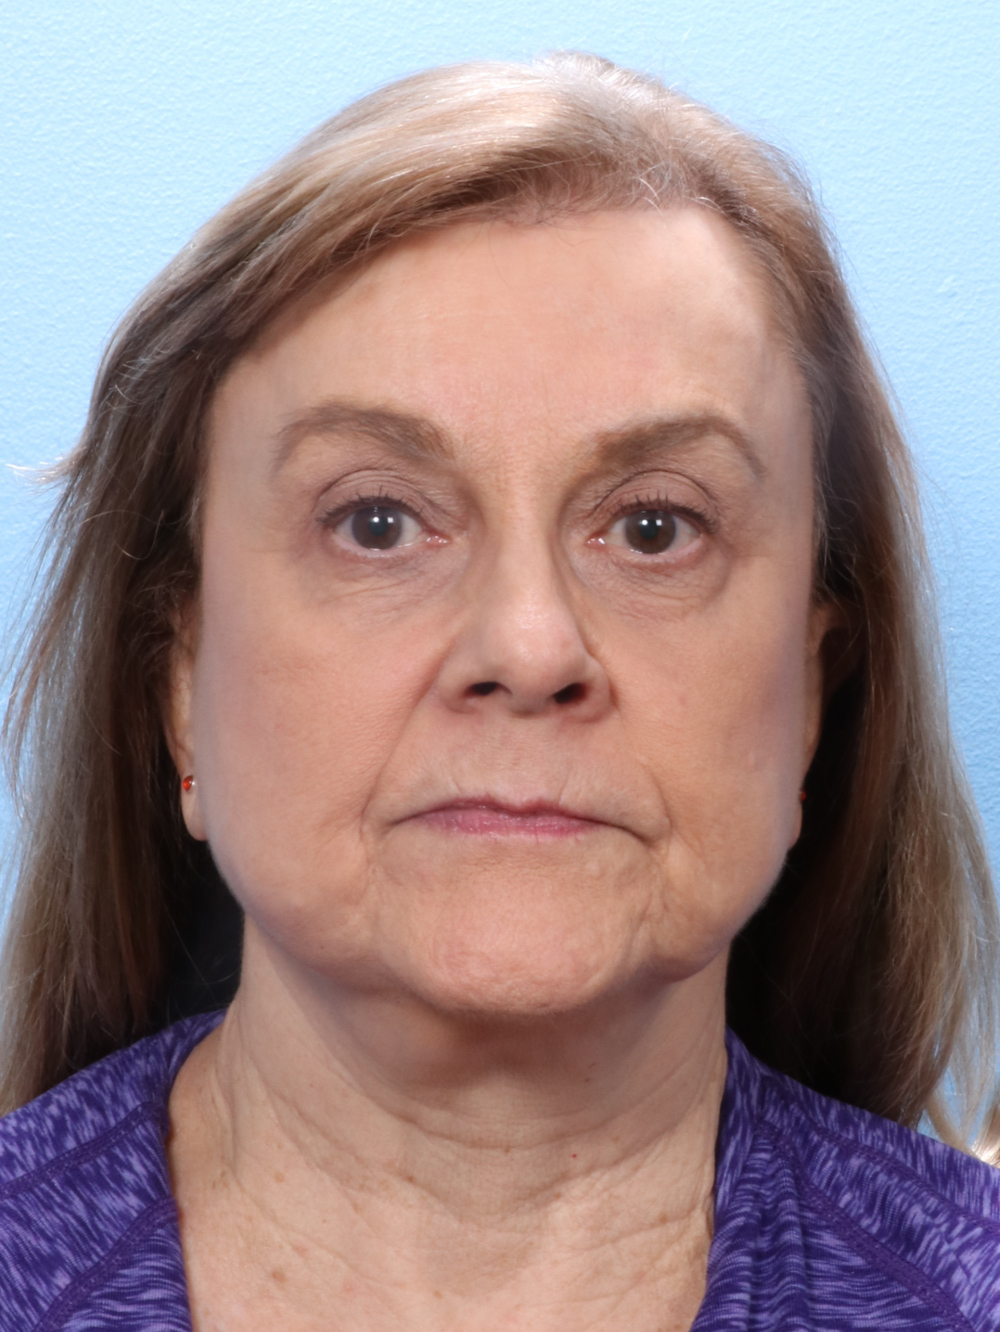 Brow Lift Patient Photo - Case 1735 - after view